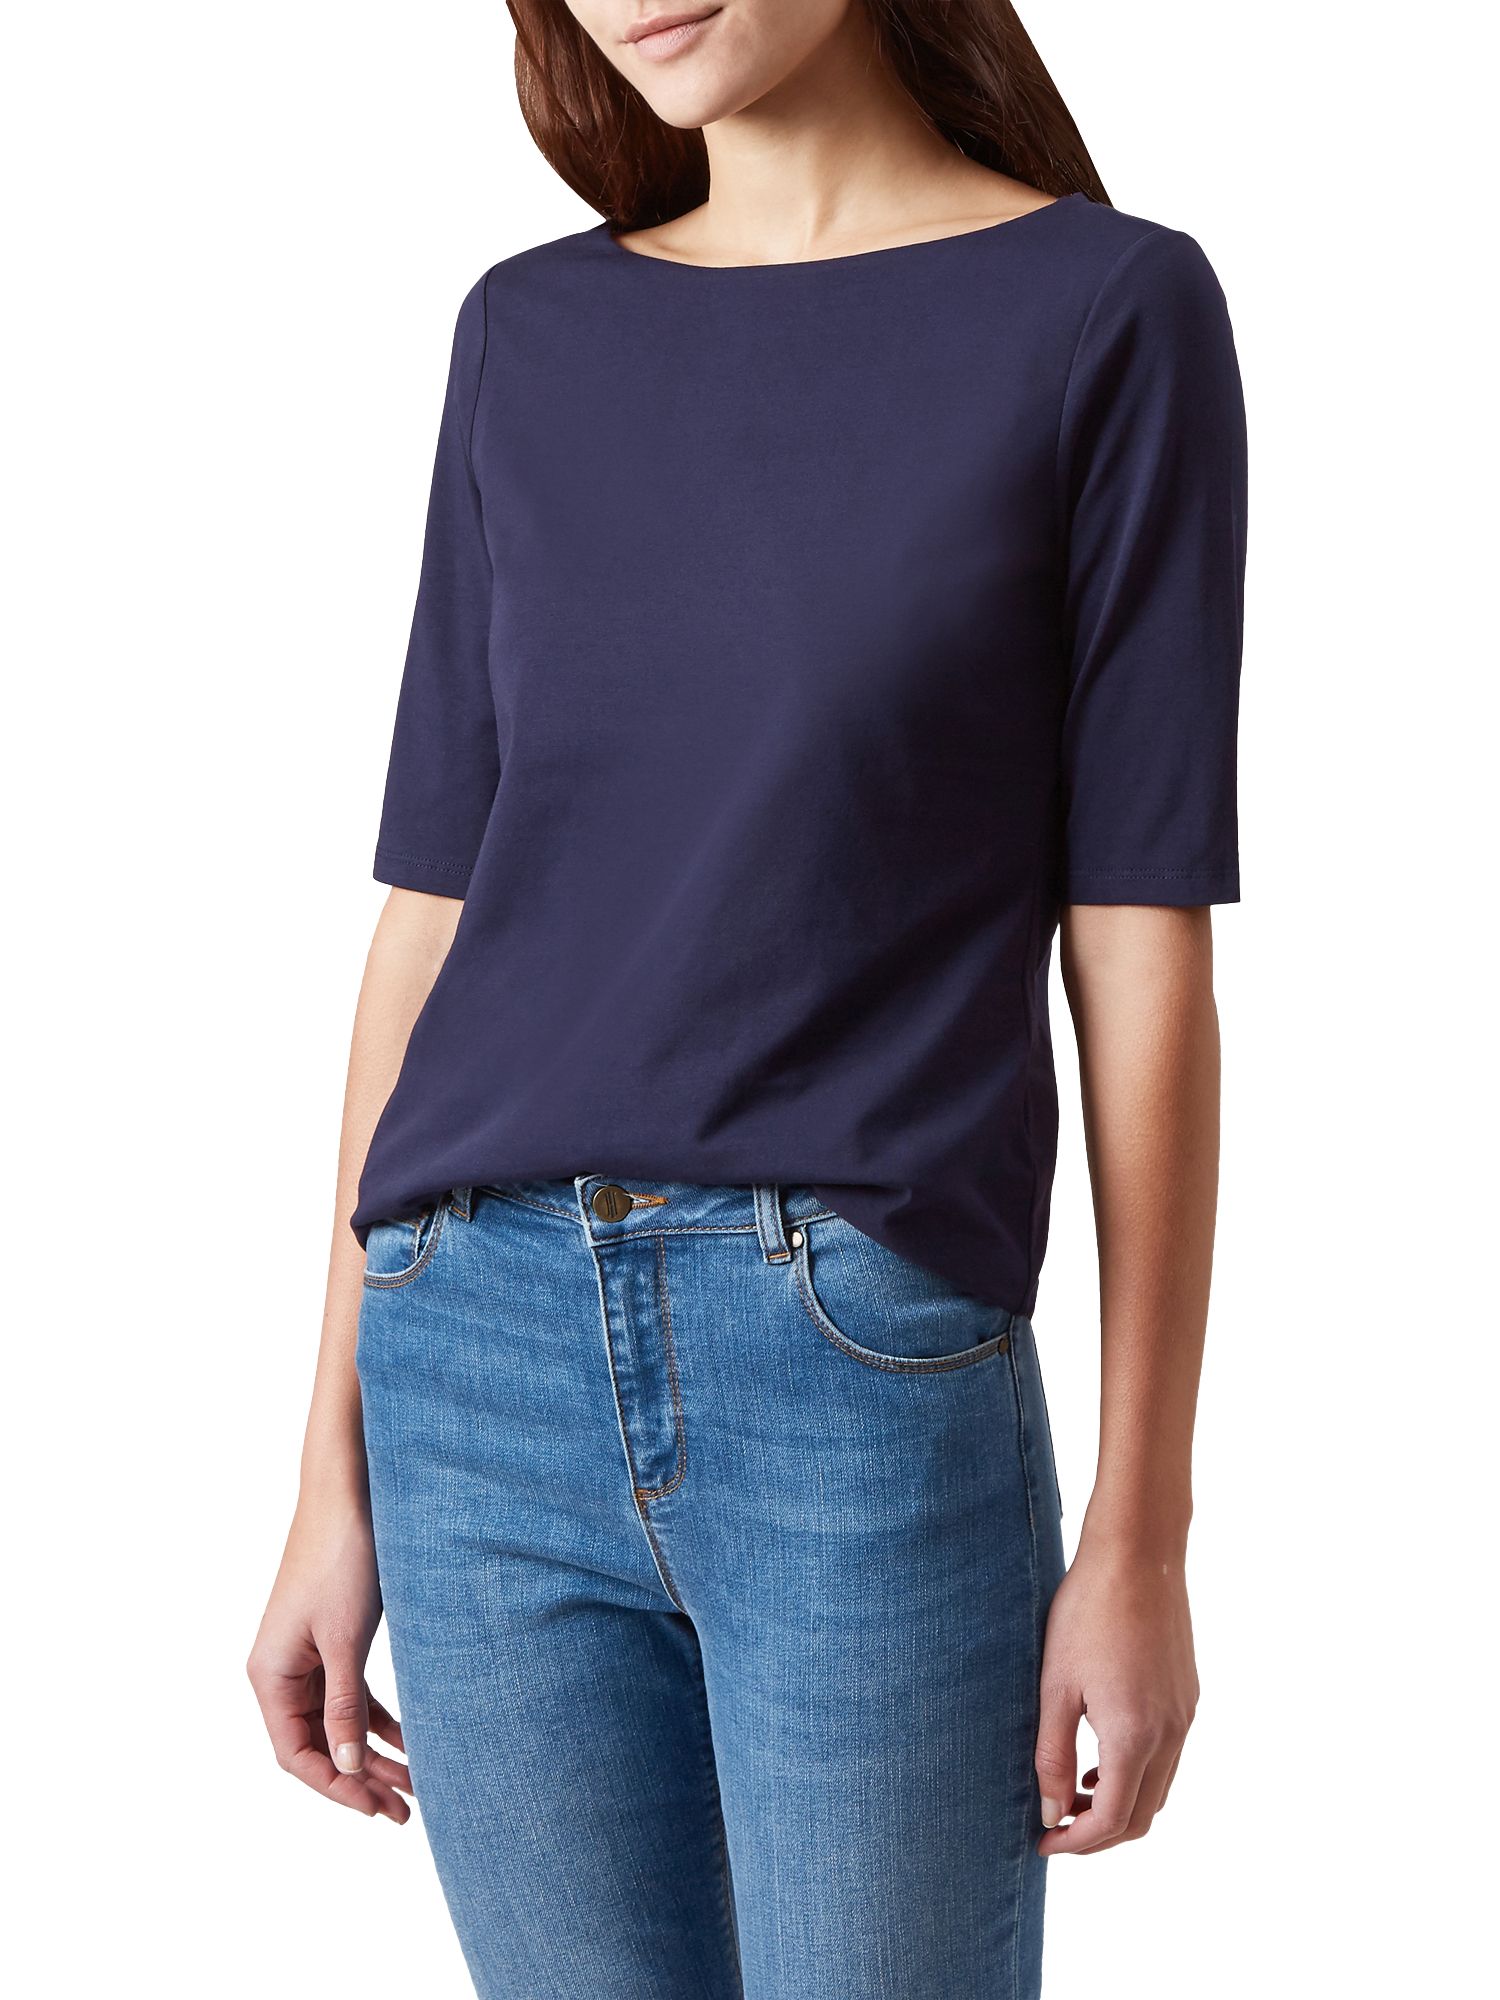 Hobbs Paige Top, French Blue, M